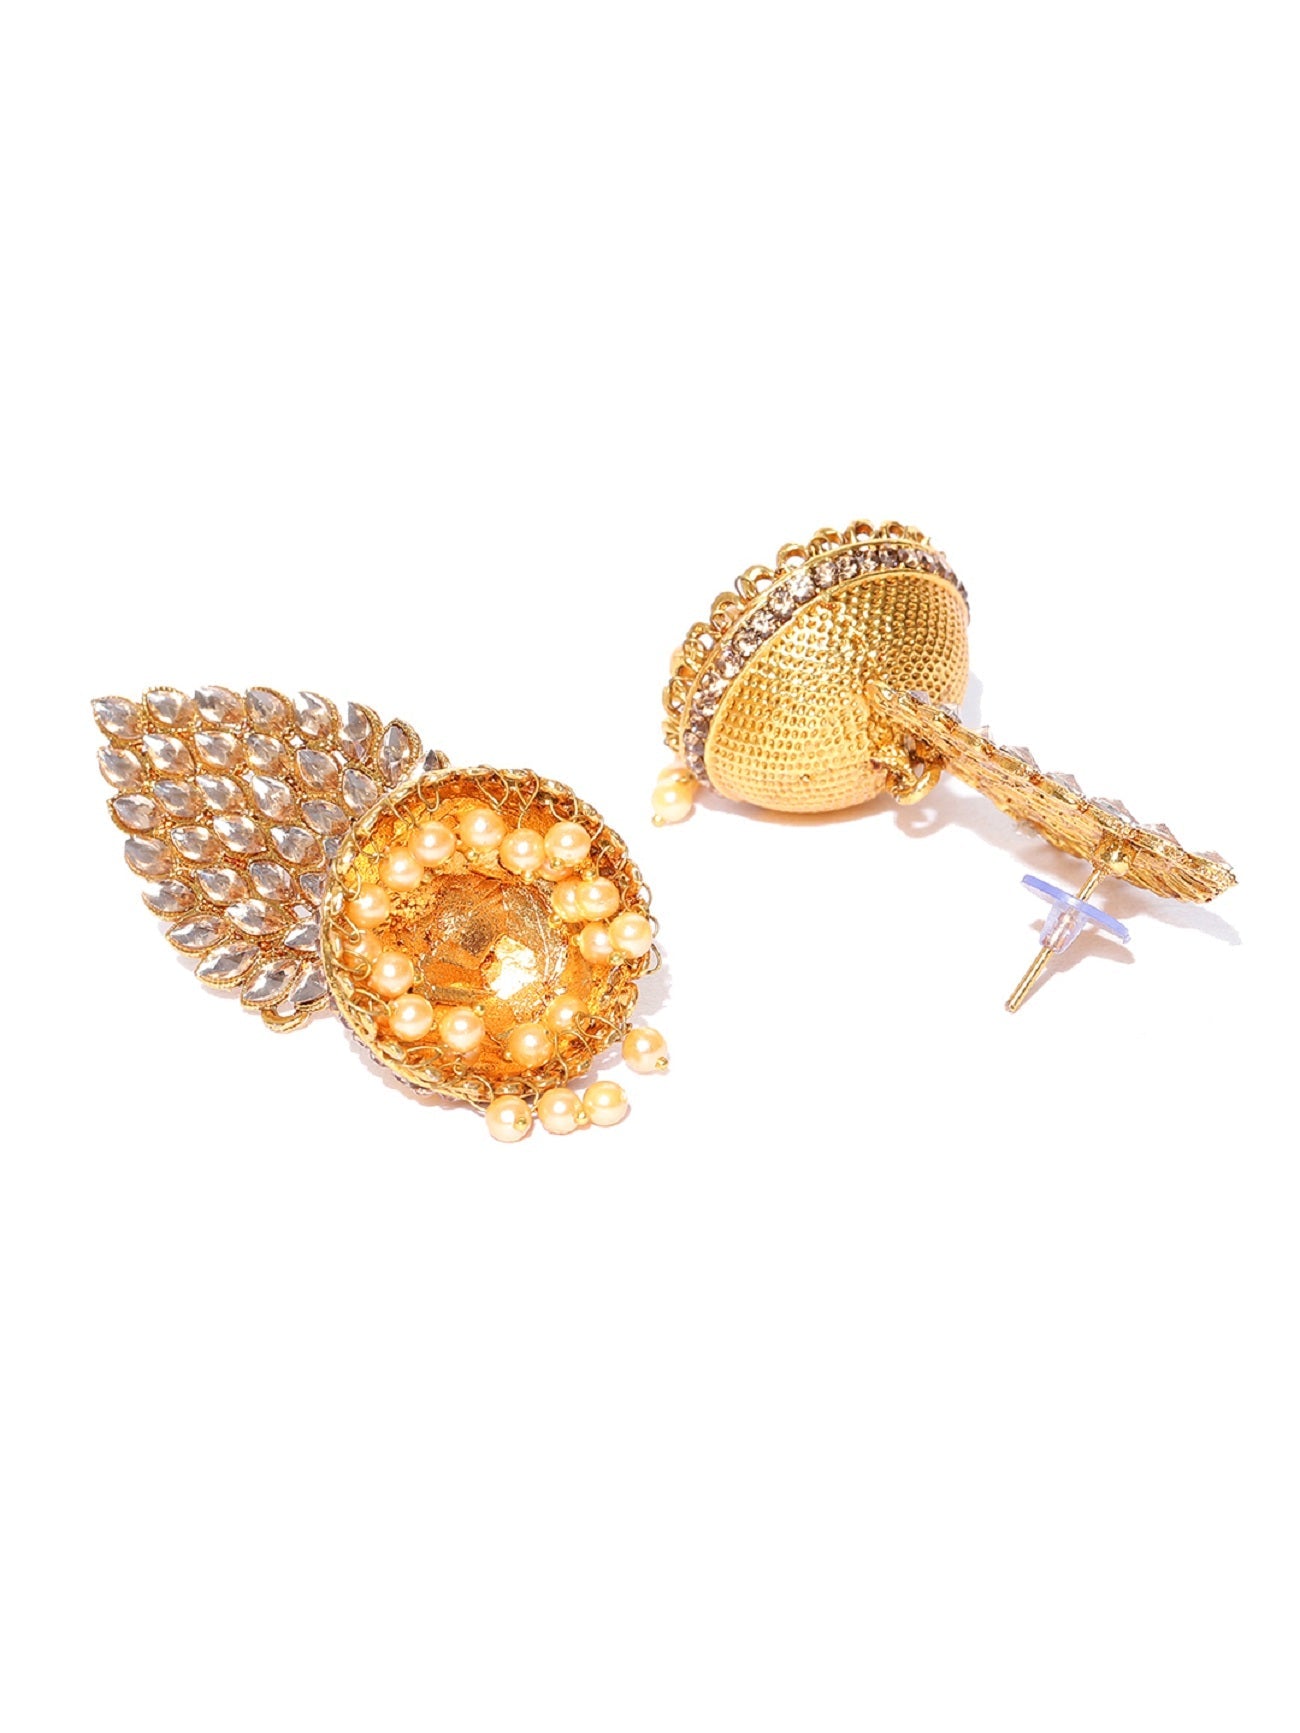 Leaf Design Gold Plated Stud Jhumka Earrings For Women And Girls - NOZ2TOZ